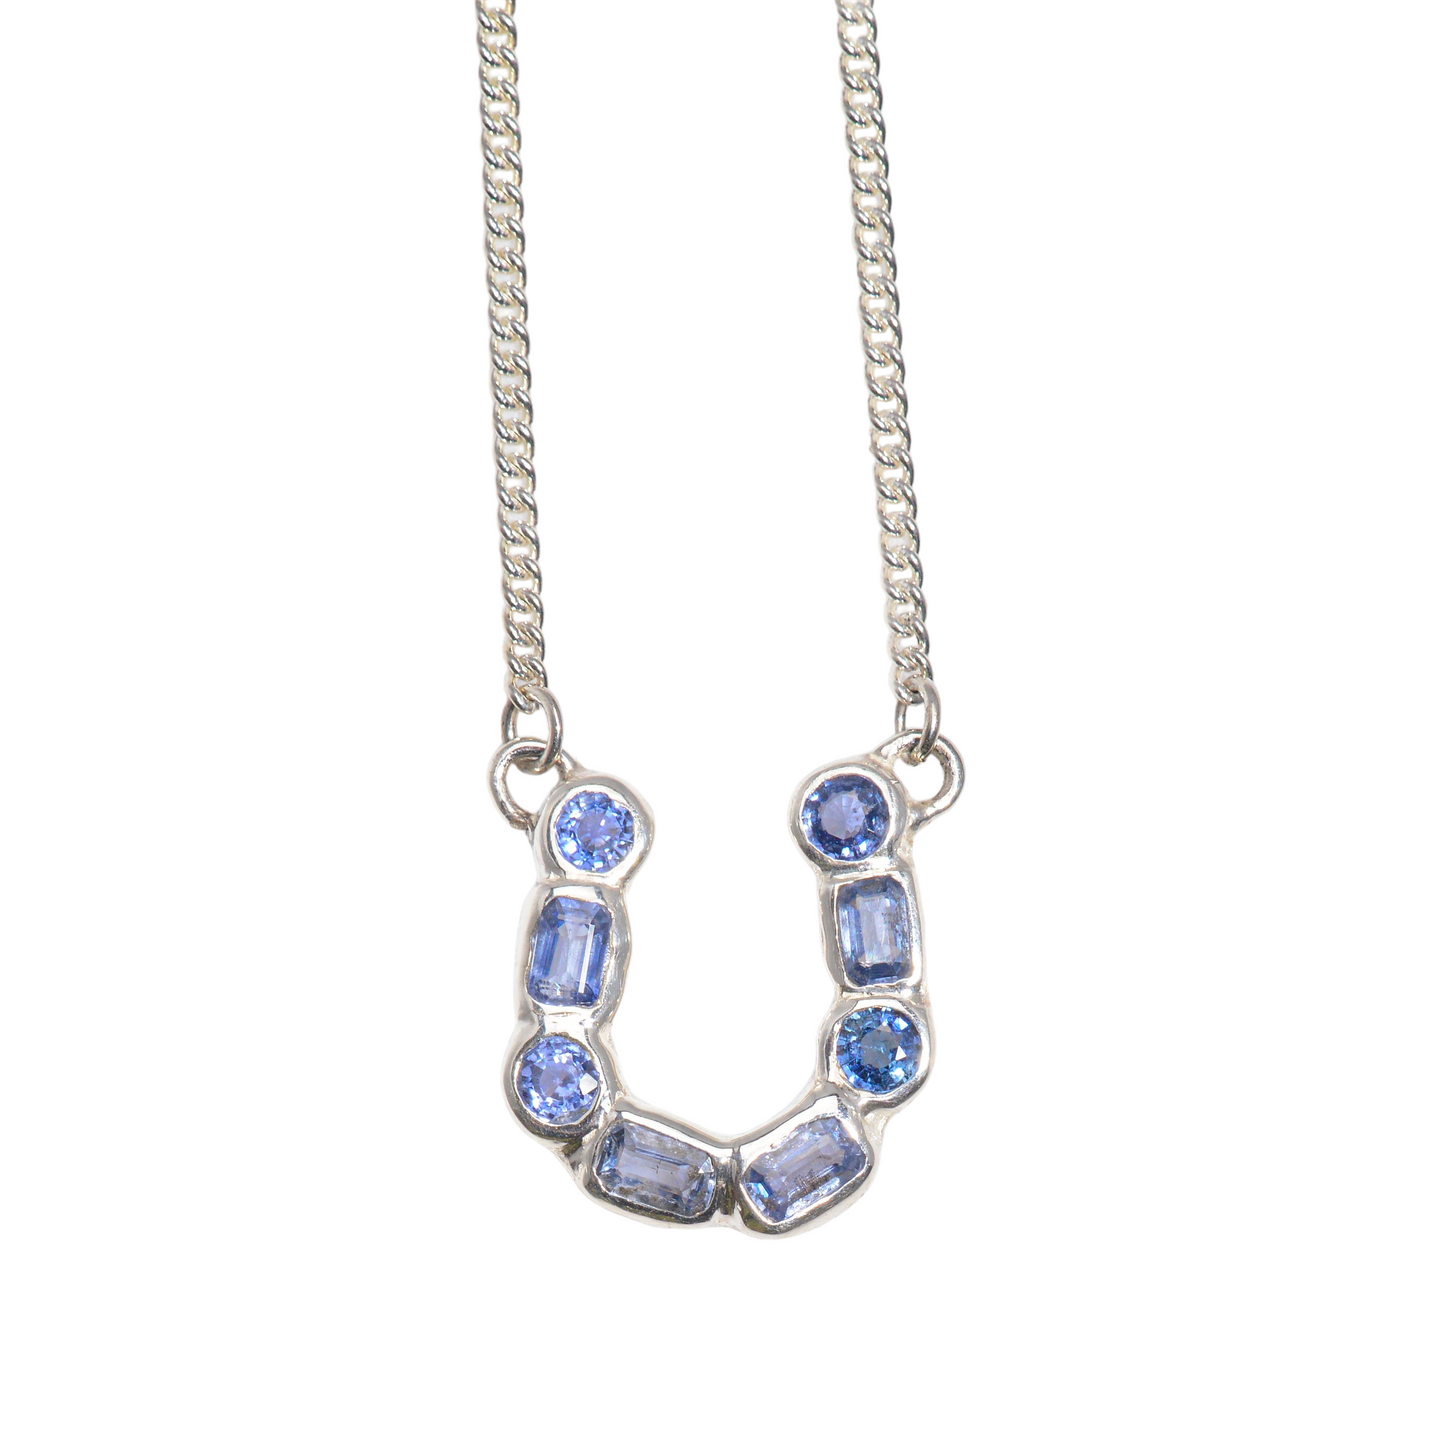 Old Lucky Blue Eyes Necklace